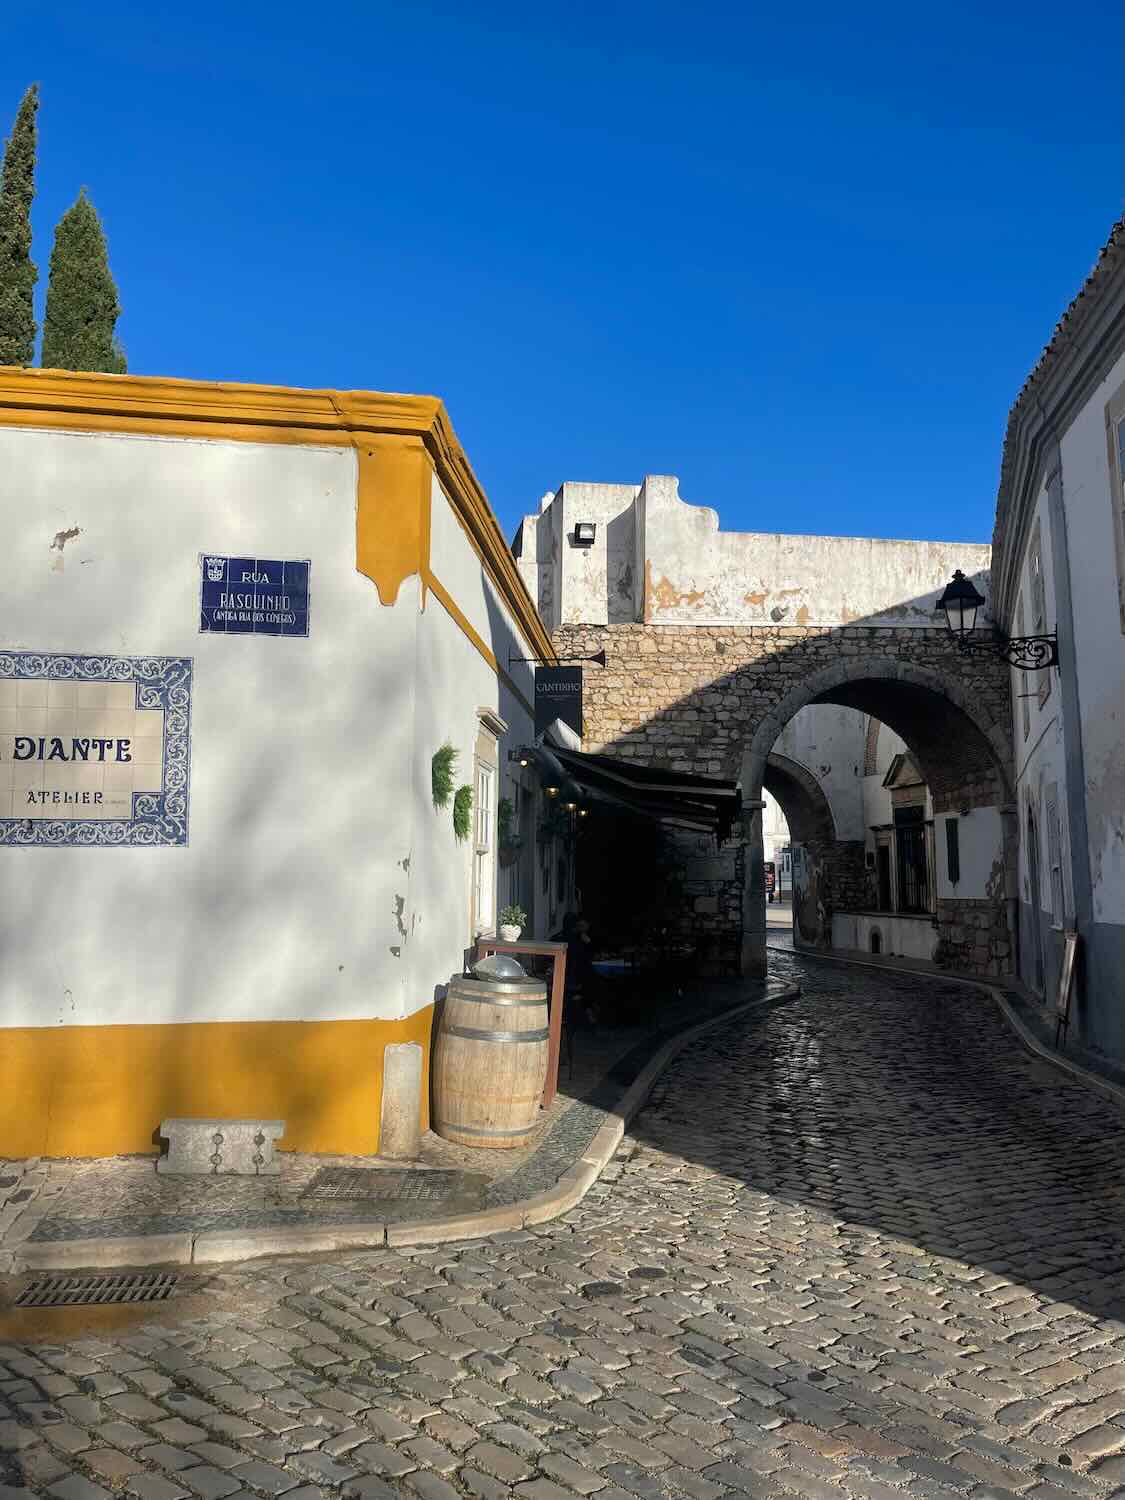 Historical street in Faro featuring the Arco da Vila with its traditional architecture, a blue street sign for 'Rua Rasquinho,' and a quaint corner adorned with a ceramic plate and a wooden barrel.